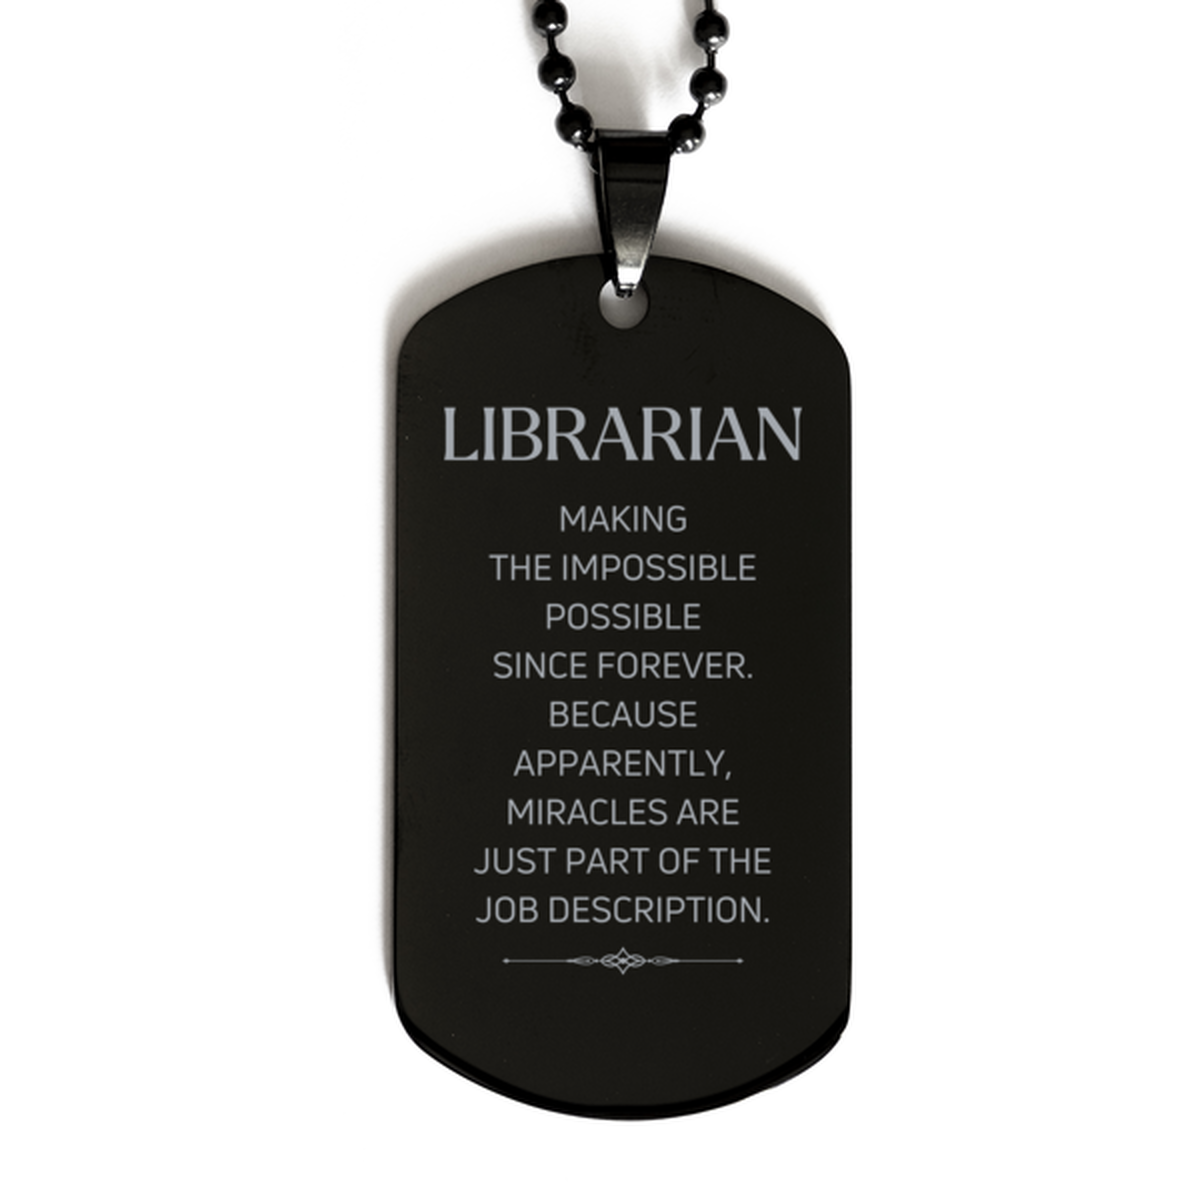 Funny Librarian Gifts, Miracles are just part of the job description, Inspirational Birthday Black Dog Tag For Librarian, Men, Women, Coworkers, Friends, Boss